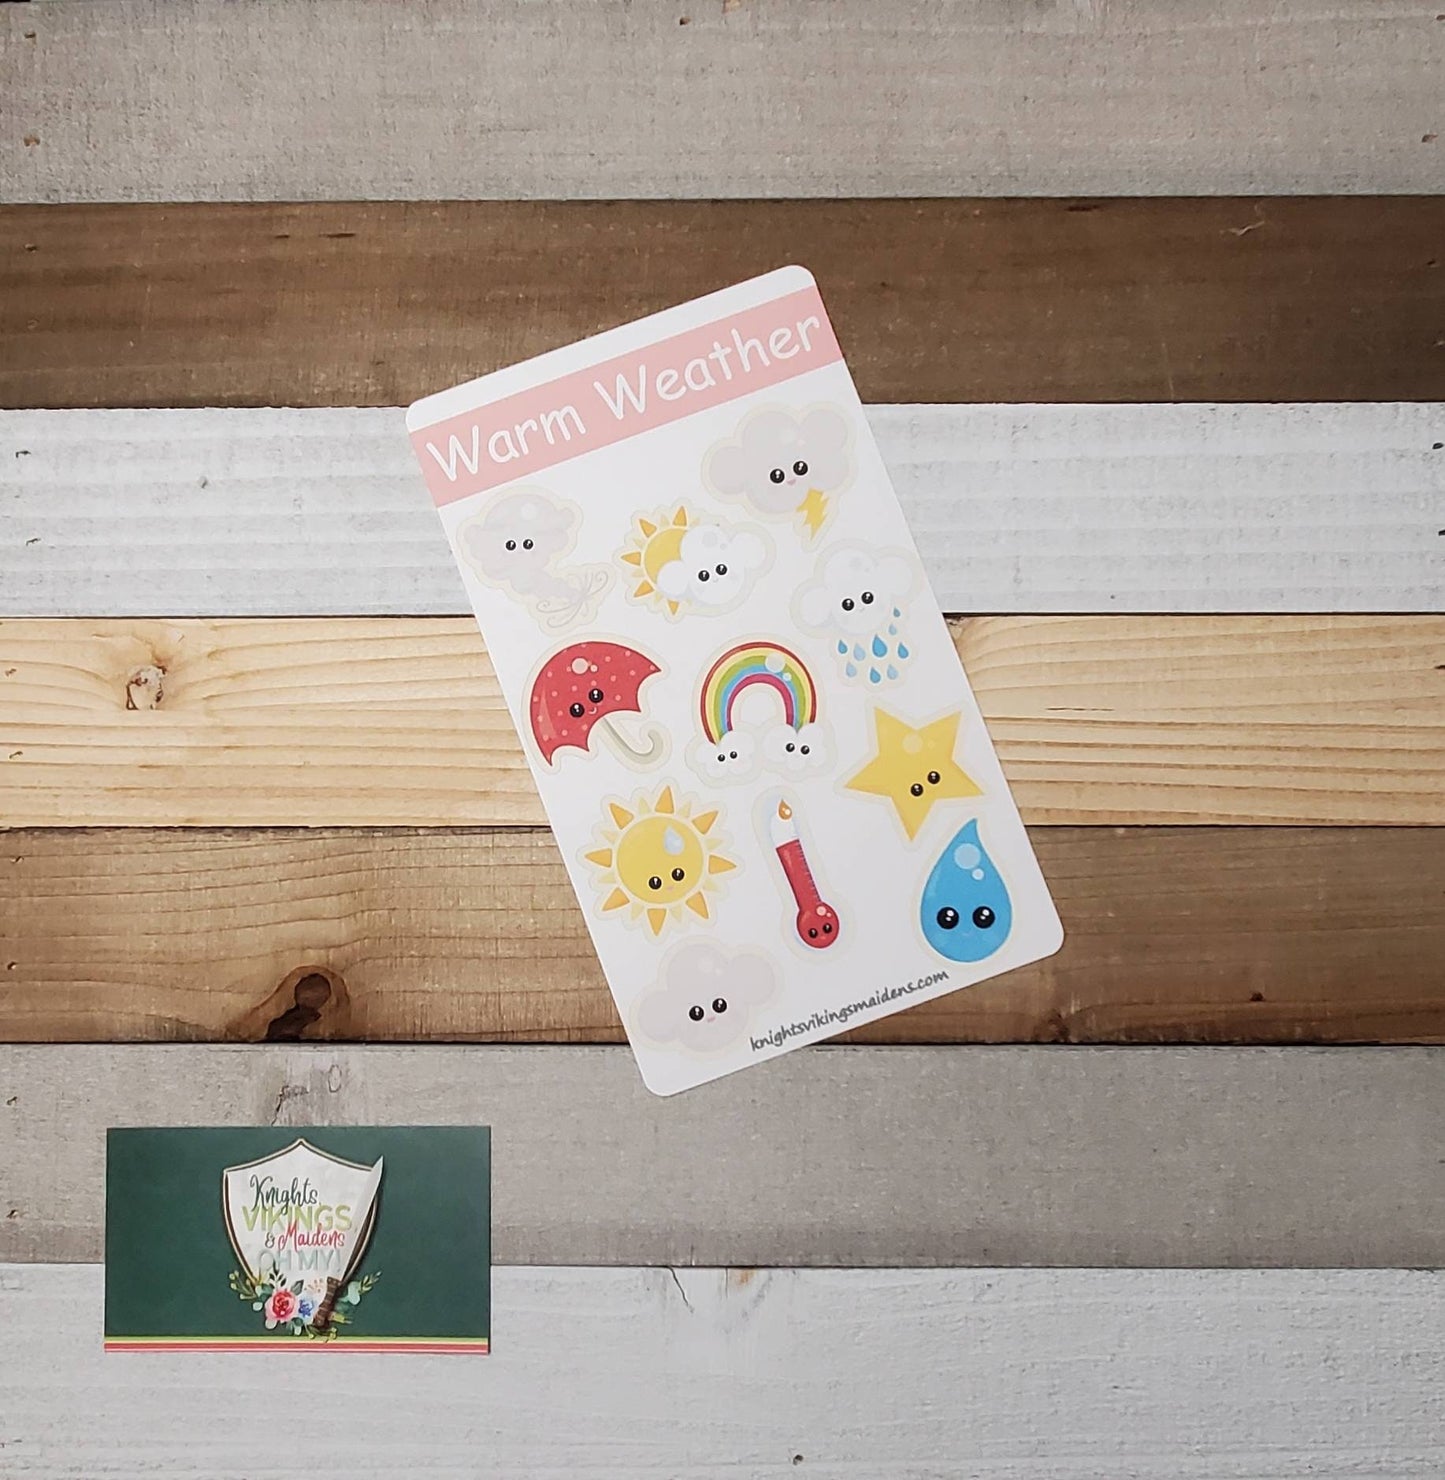 Kawaii Weather Stickers, Cold weather, Warm Weather, Bullet Journal, Planning Stickers, Meterology, Rain, Rainbow, Snow